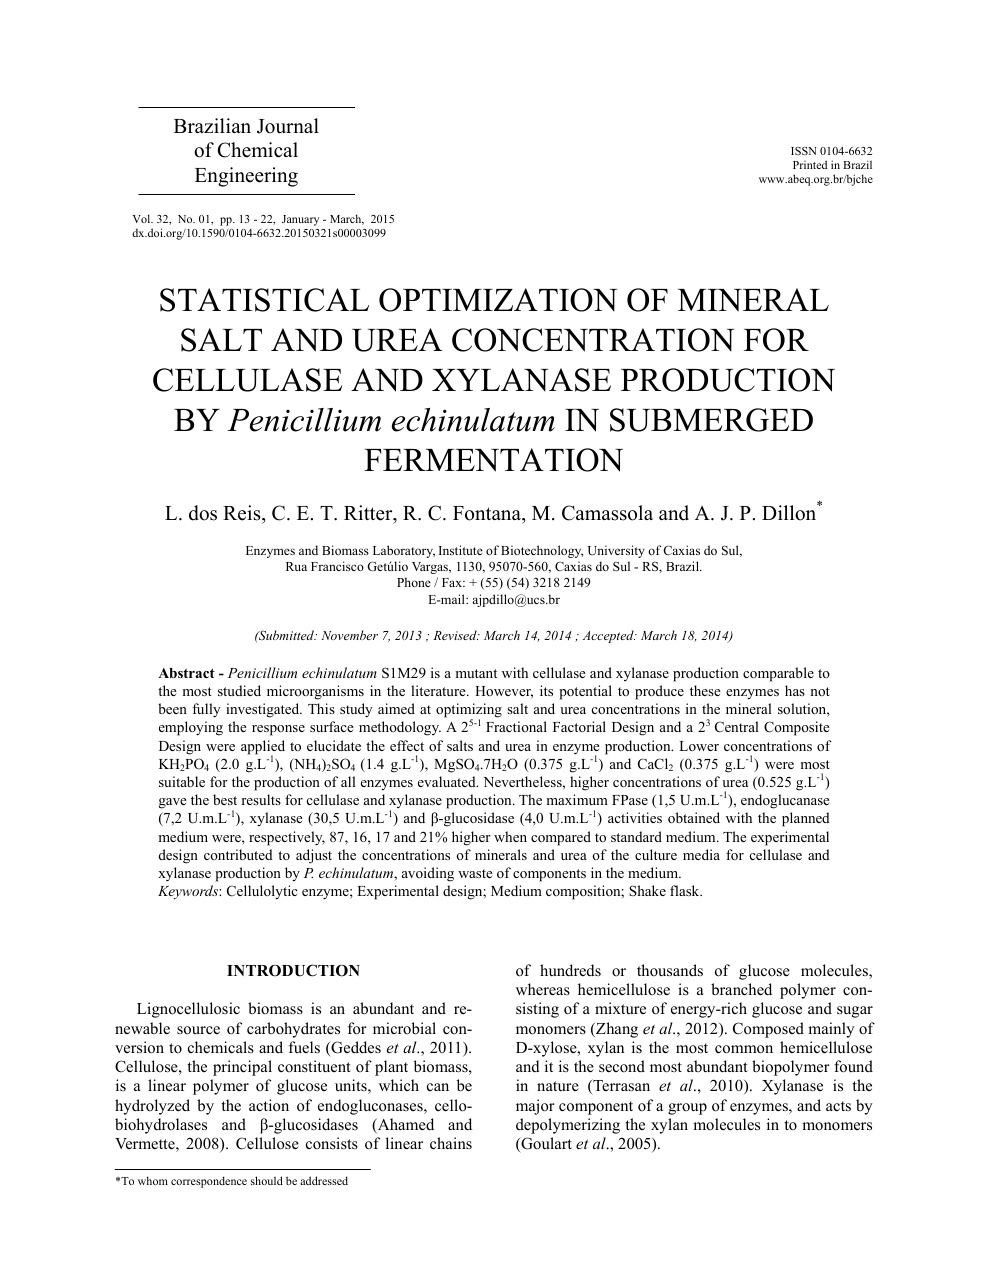 Statistical Optimization Of Mineral Salt And Urea Concentration For Cellulase And Xylanase Production By Penicillium Echinulatum In Submerged Fermentation Topic Of Research Paper In Chemical Engineering Download Scholarly Article Pdf And